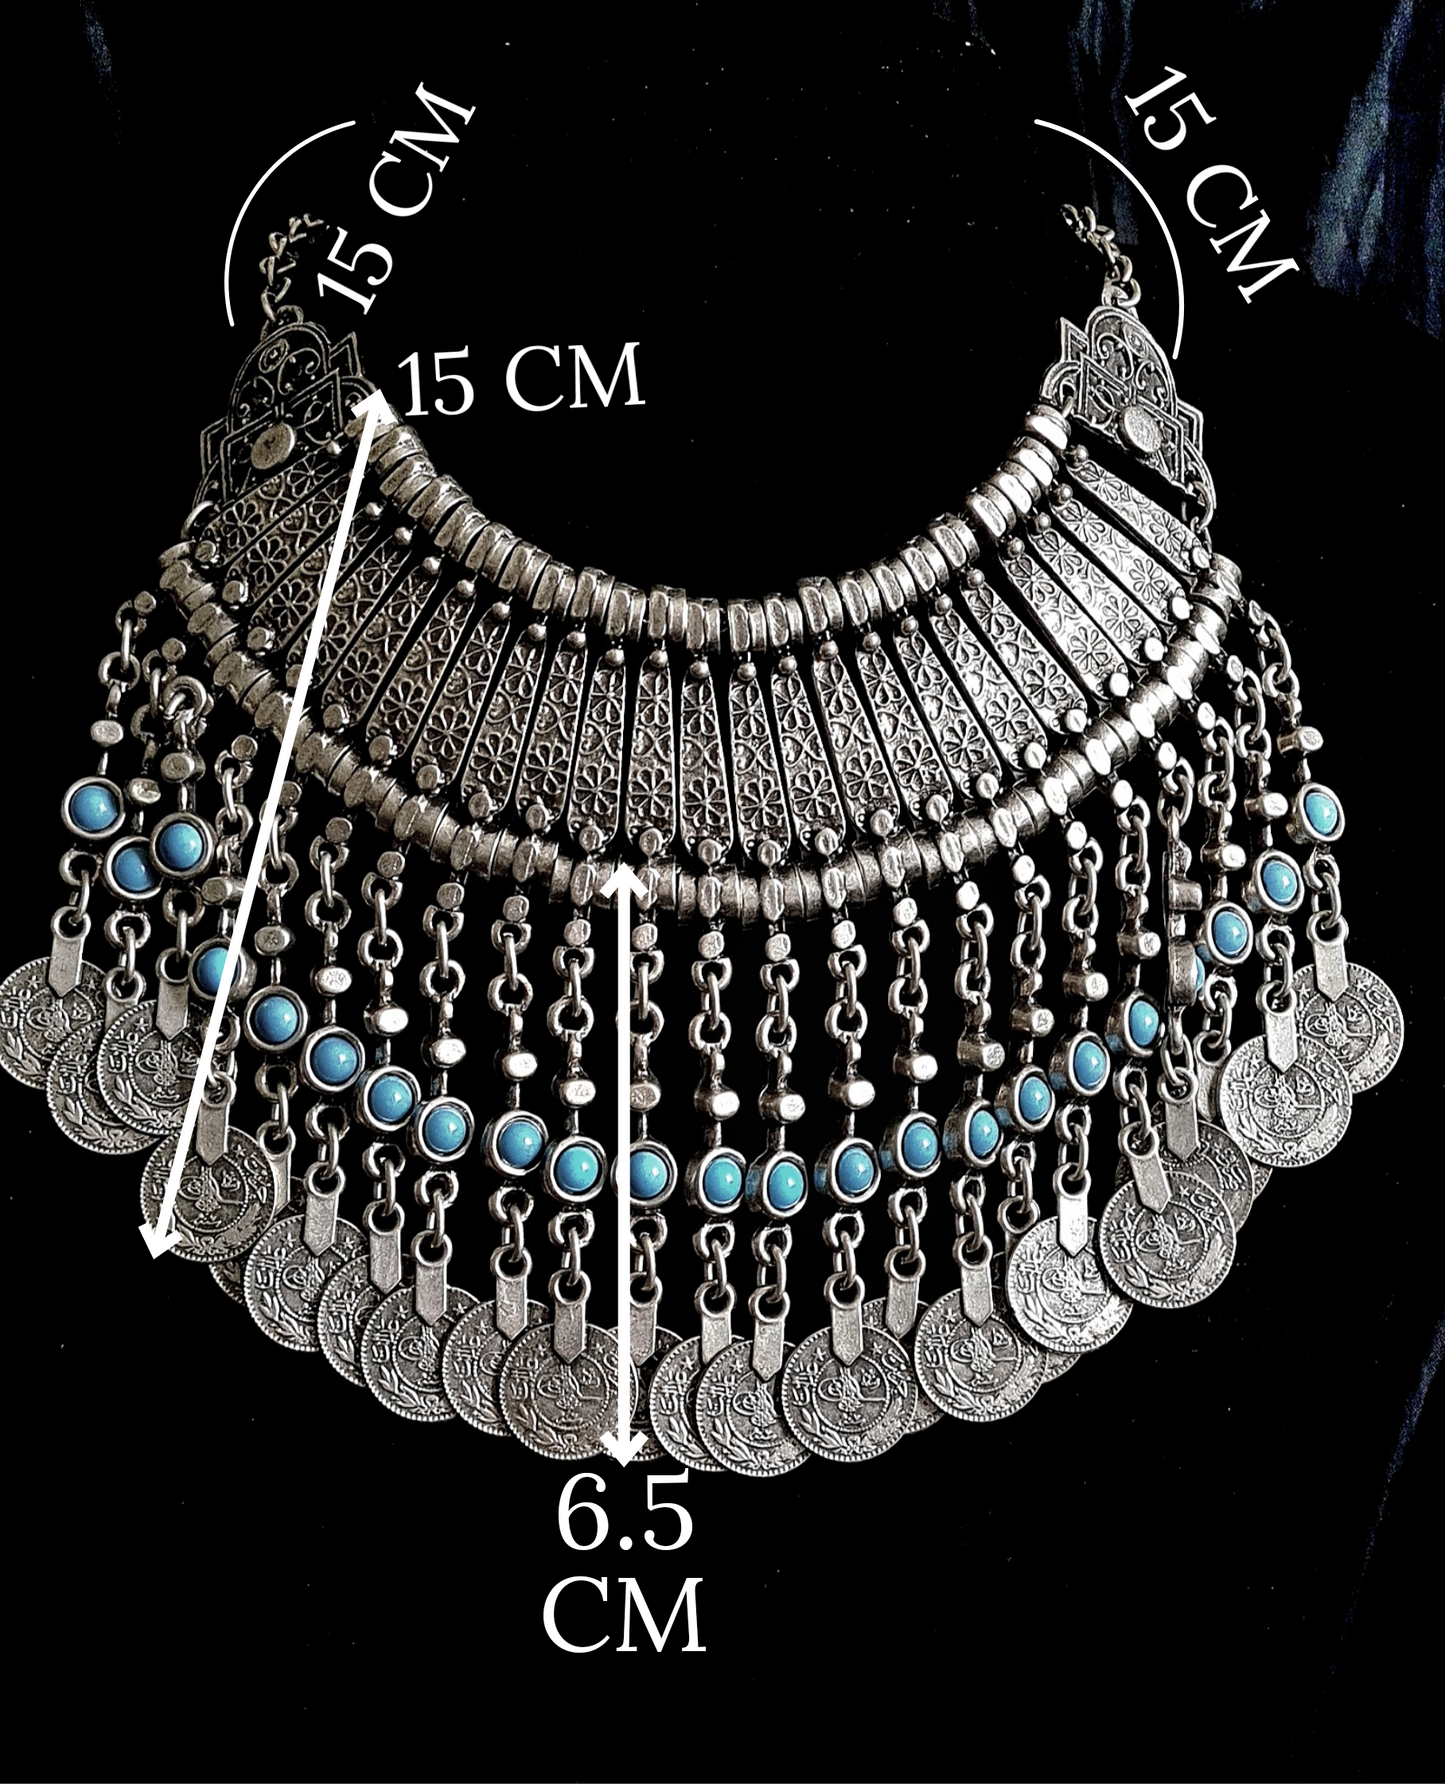 A silver necklace with turquoise beads and coins on a black background. The necklace is made of silver and has a delicate design. The turquoise beads are small and round, and they have a bright blue color. The coins are also small and round, and they have a bronze color. The necklace is long and hangs down to the chest. with measurements.